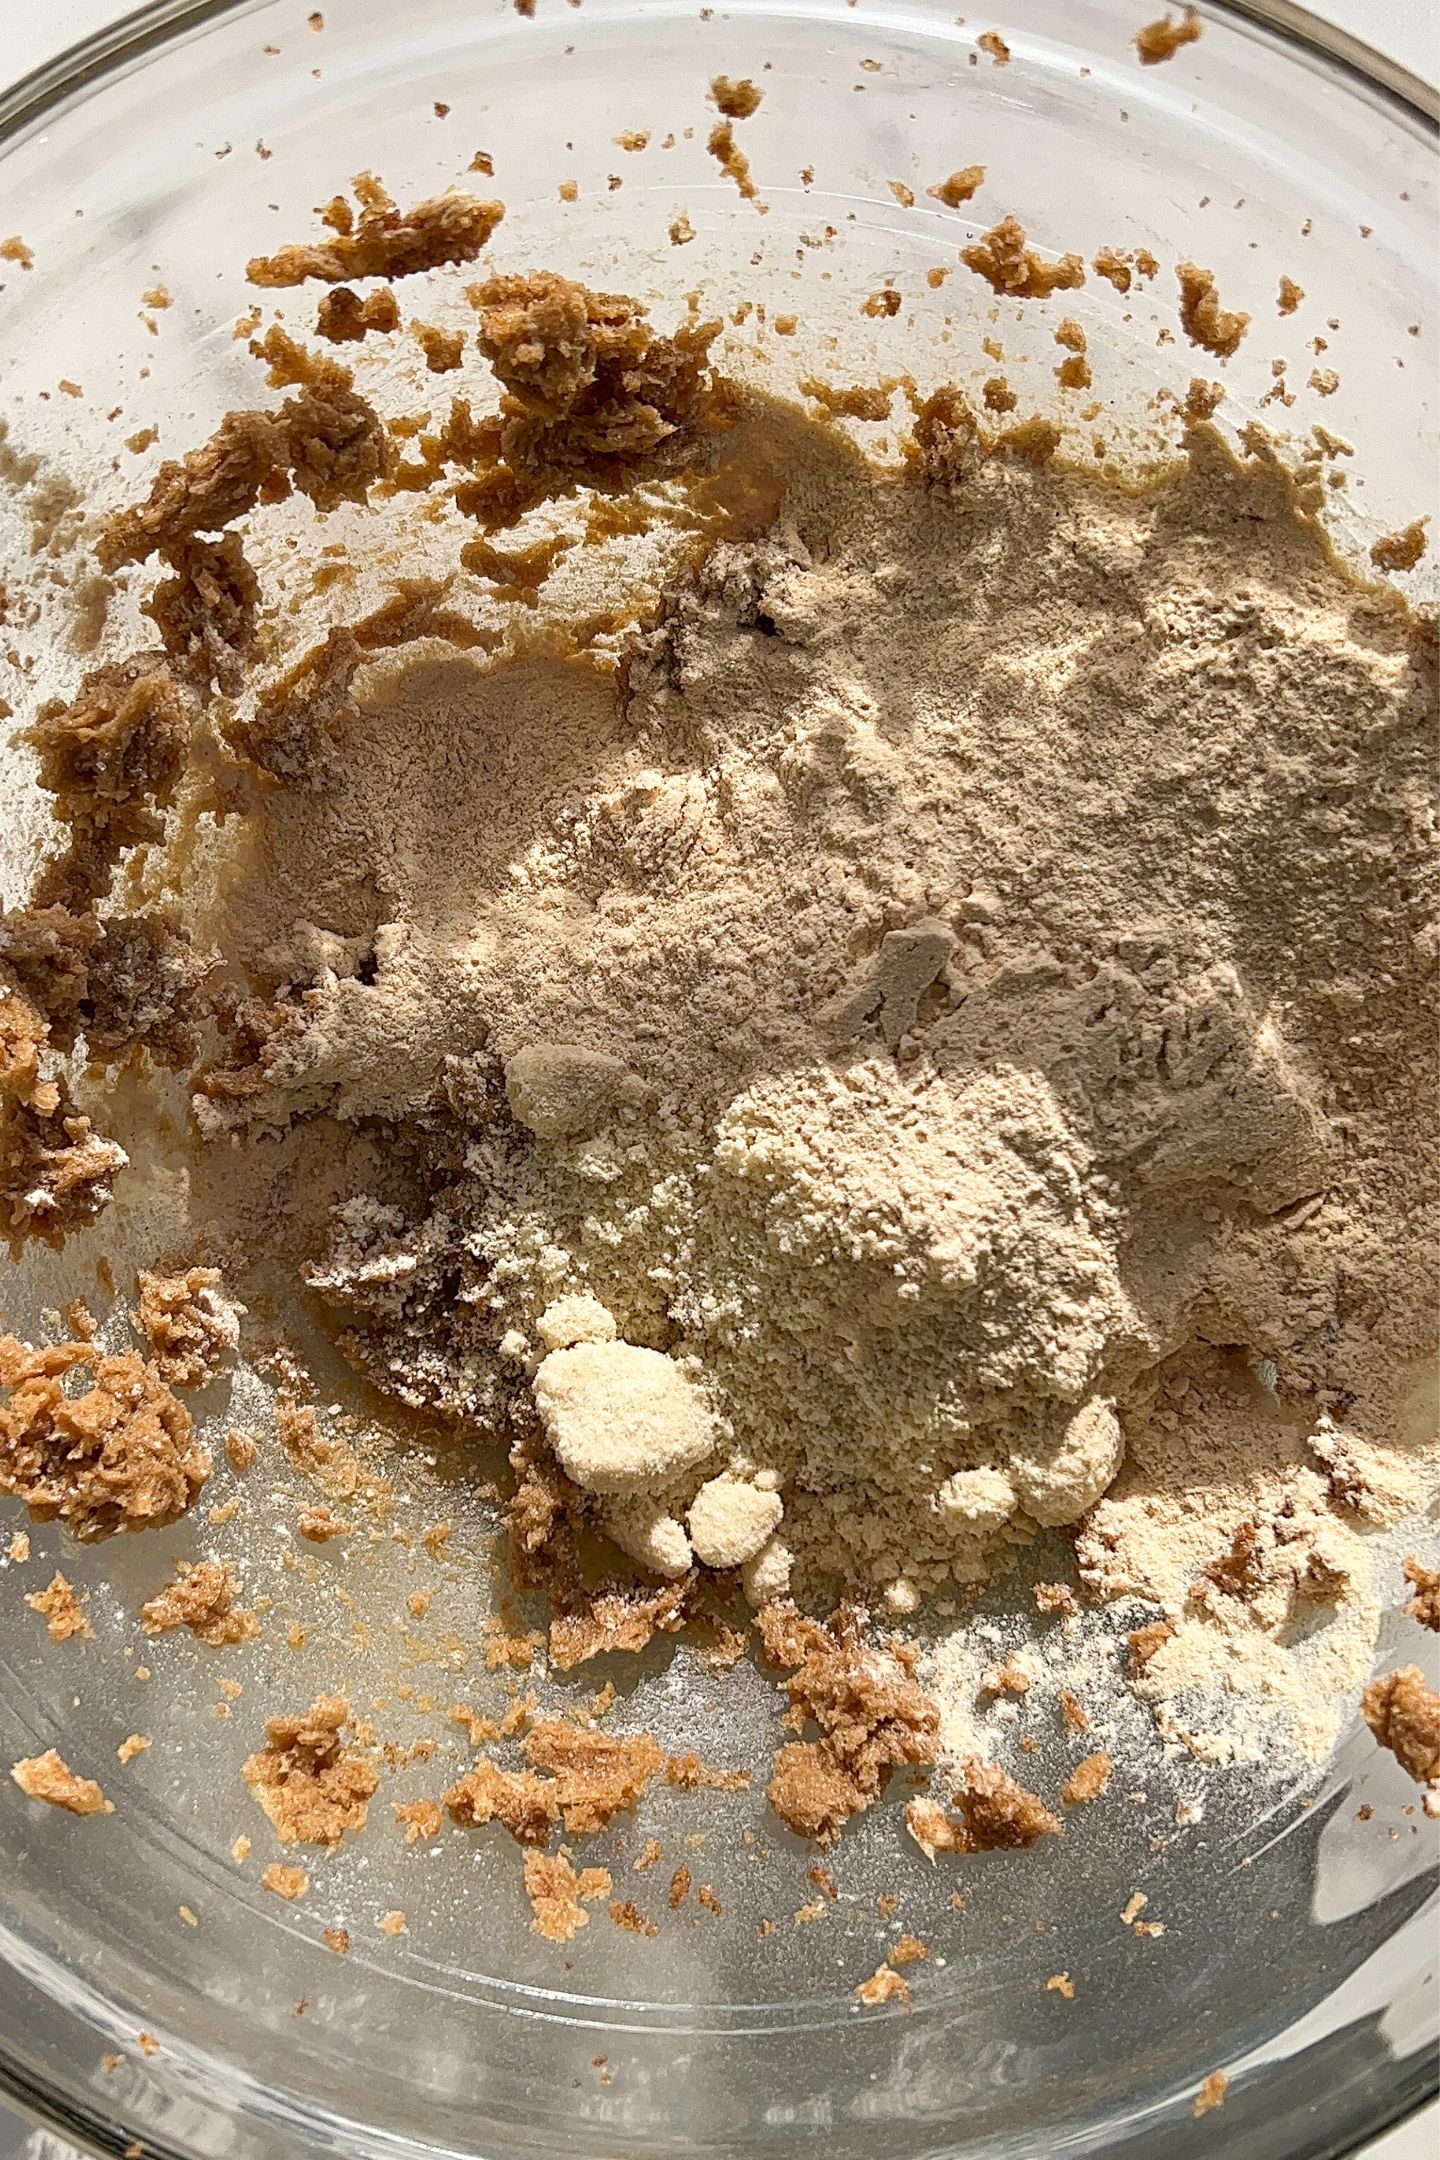 adding protein powder to the batter